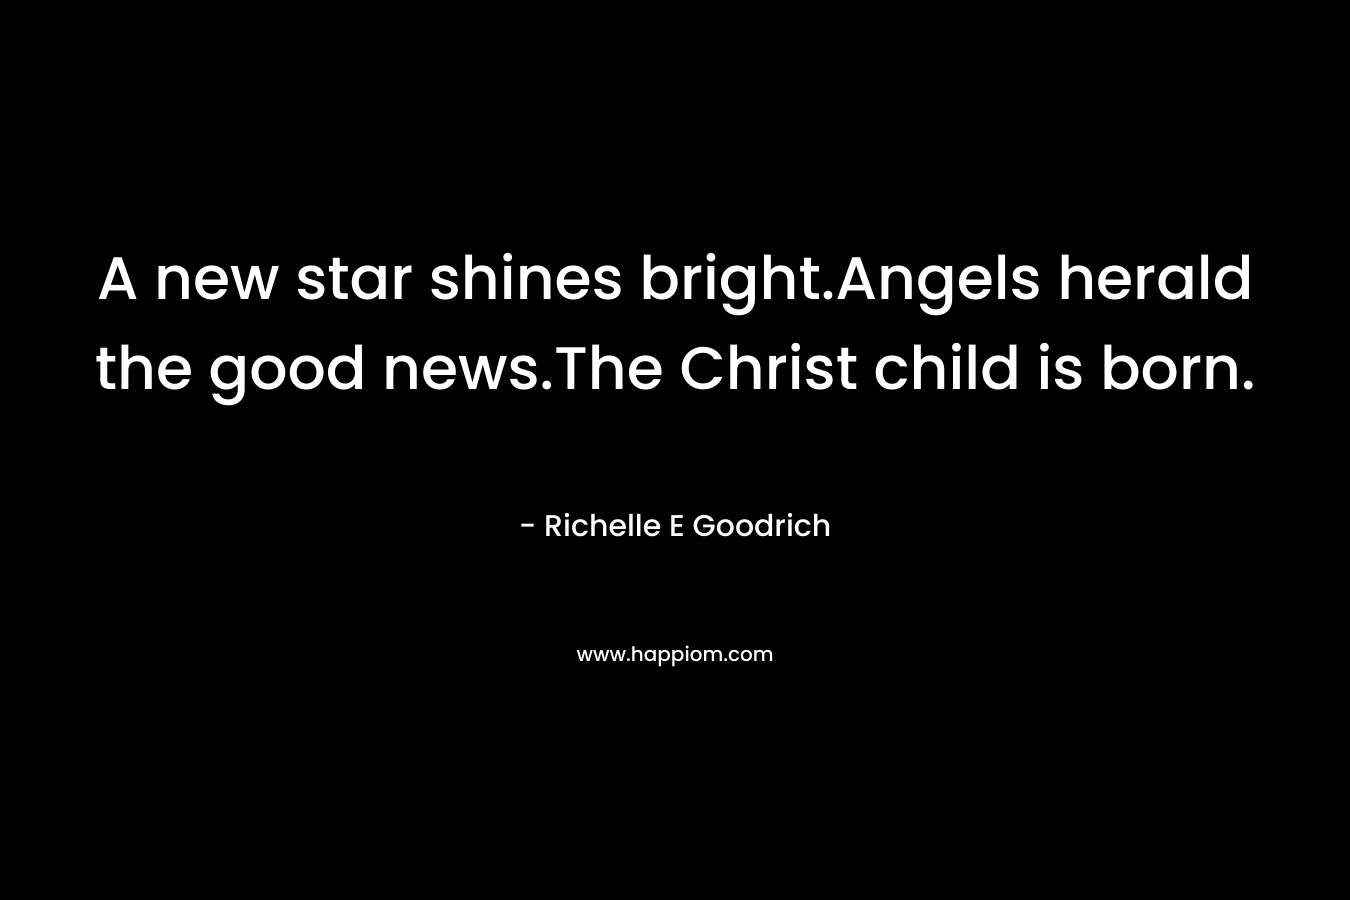 A new star shines bright.Angels herald the good news.The Christ child is born.